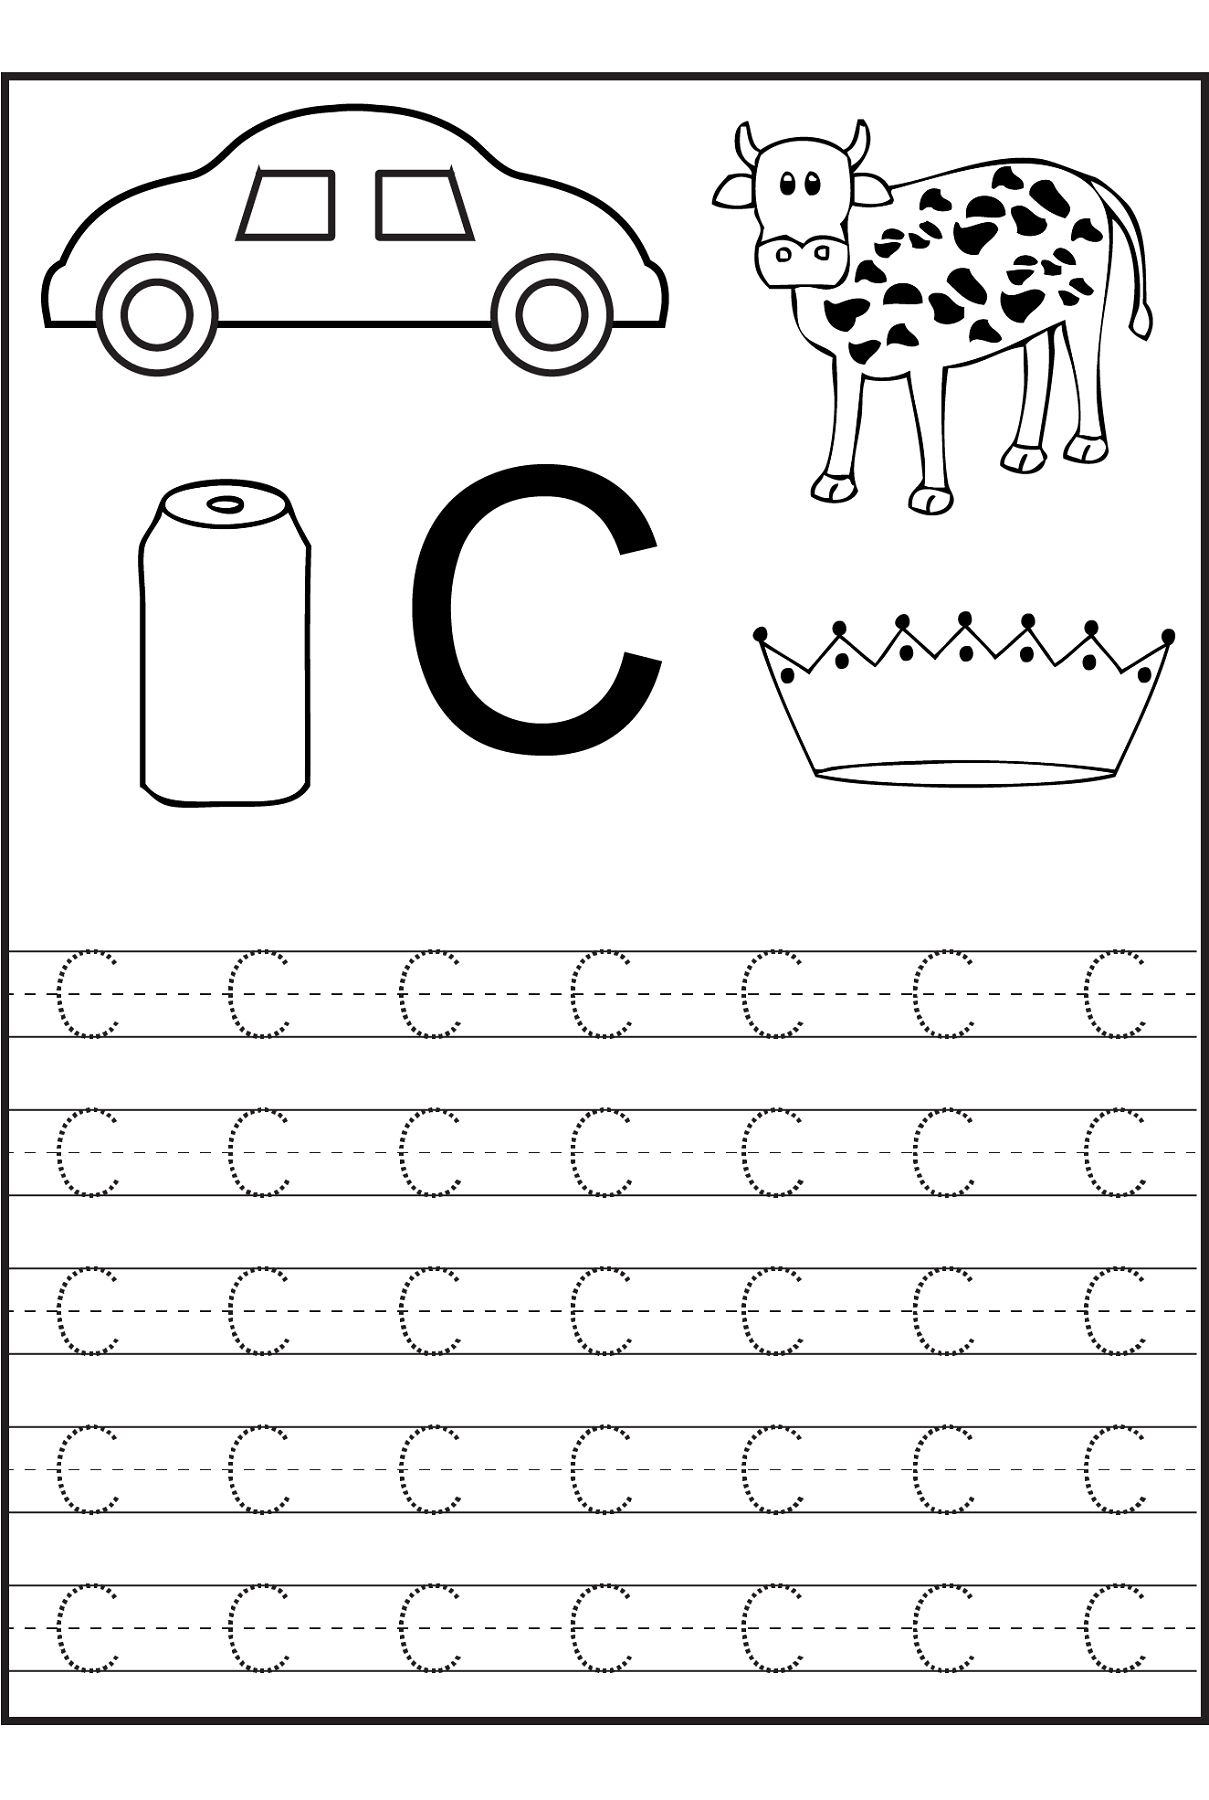 Trace The Letter C Worksheets | Learning Worksheets, Letter within Letter C Tracing Worksheets For Preschool